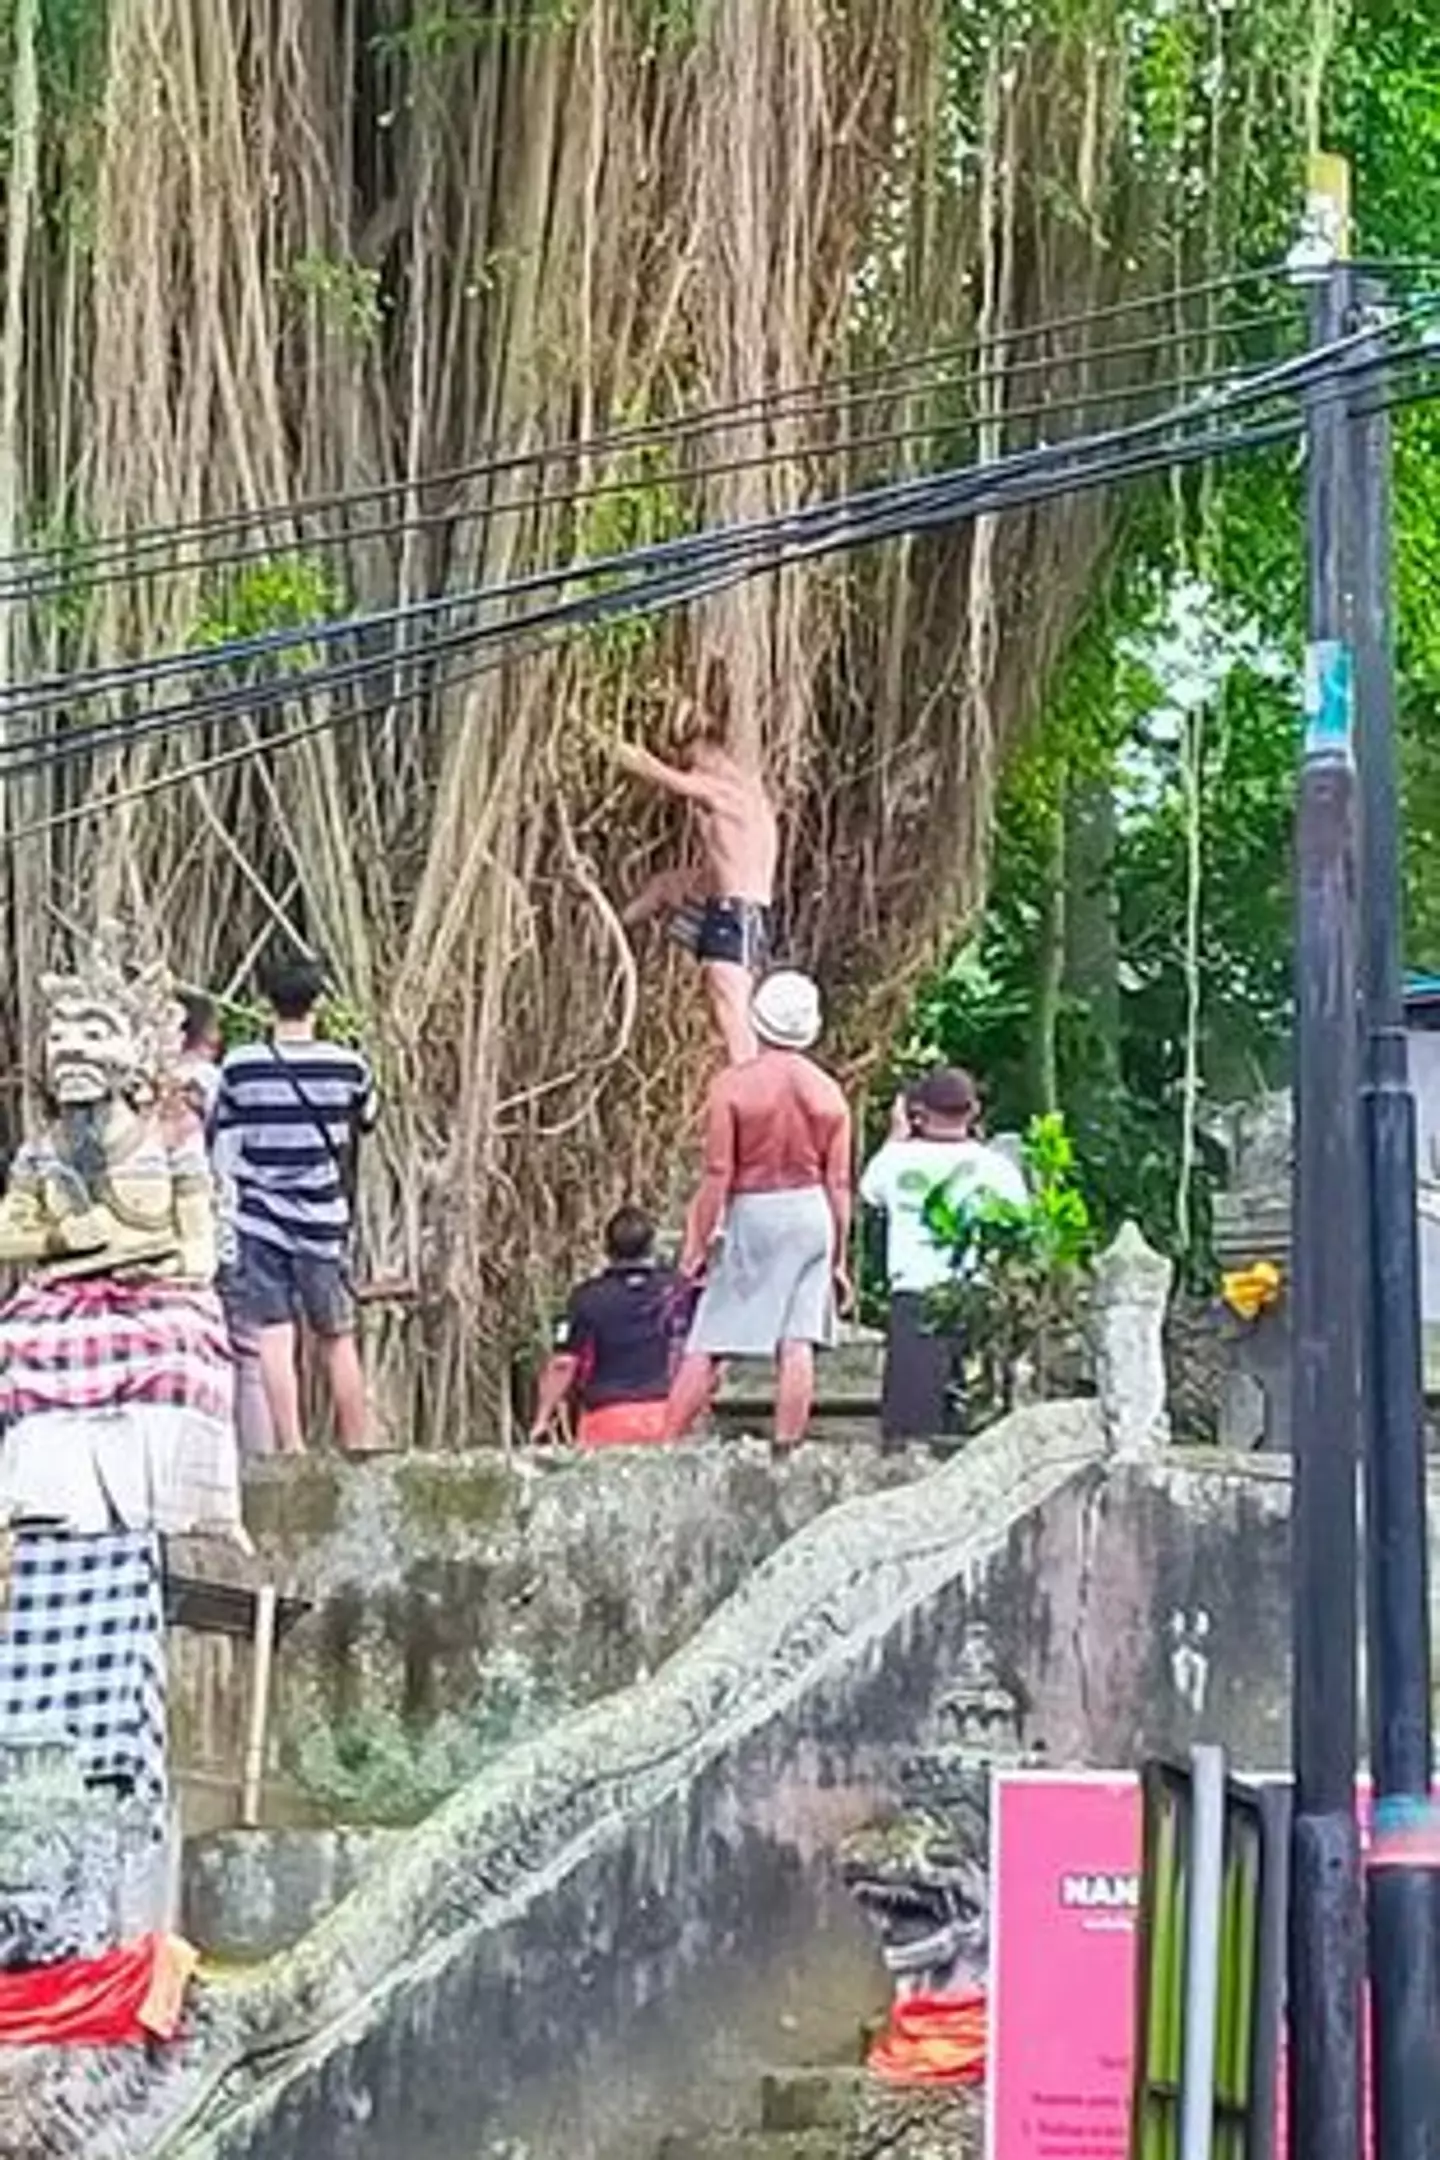 An Aussie holidaymaker has been fined and ordered to pray for forgiveness after climbing a sacred tree in Bali.